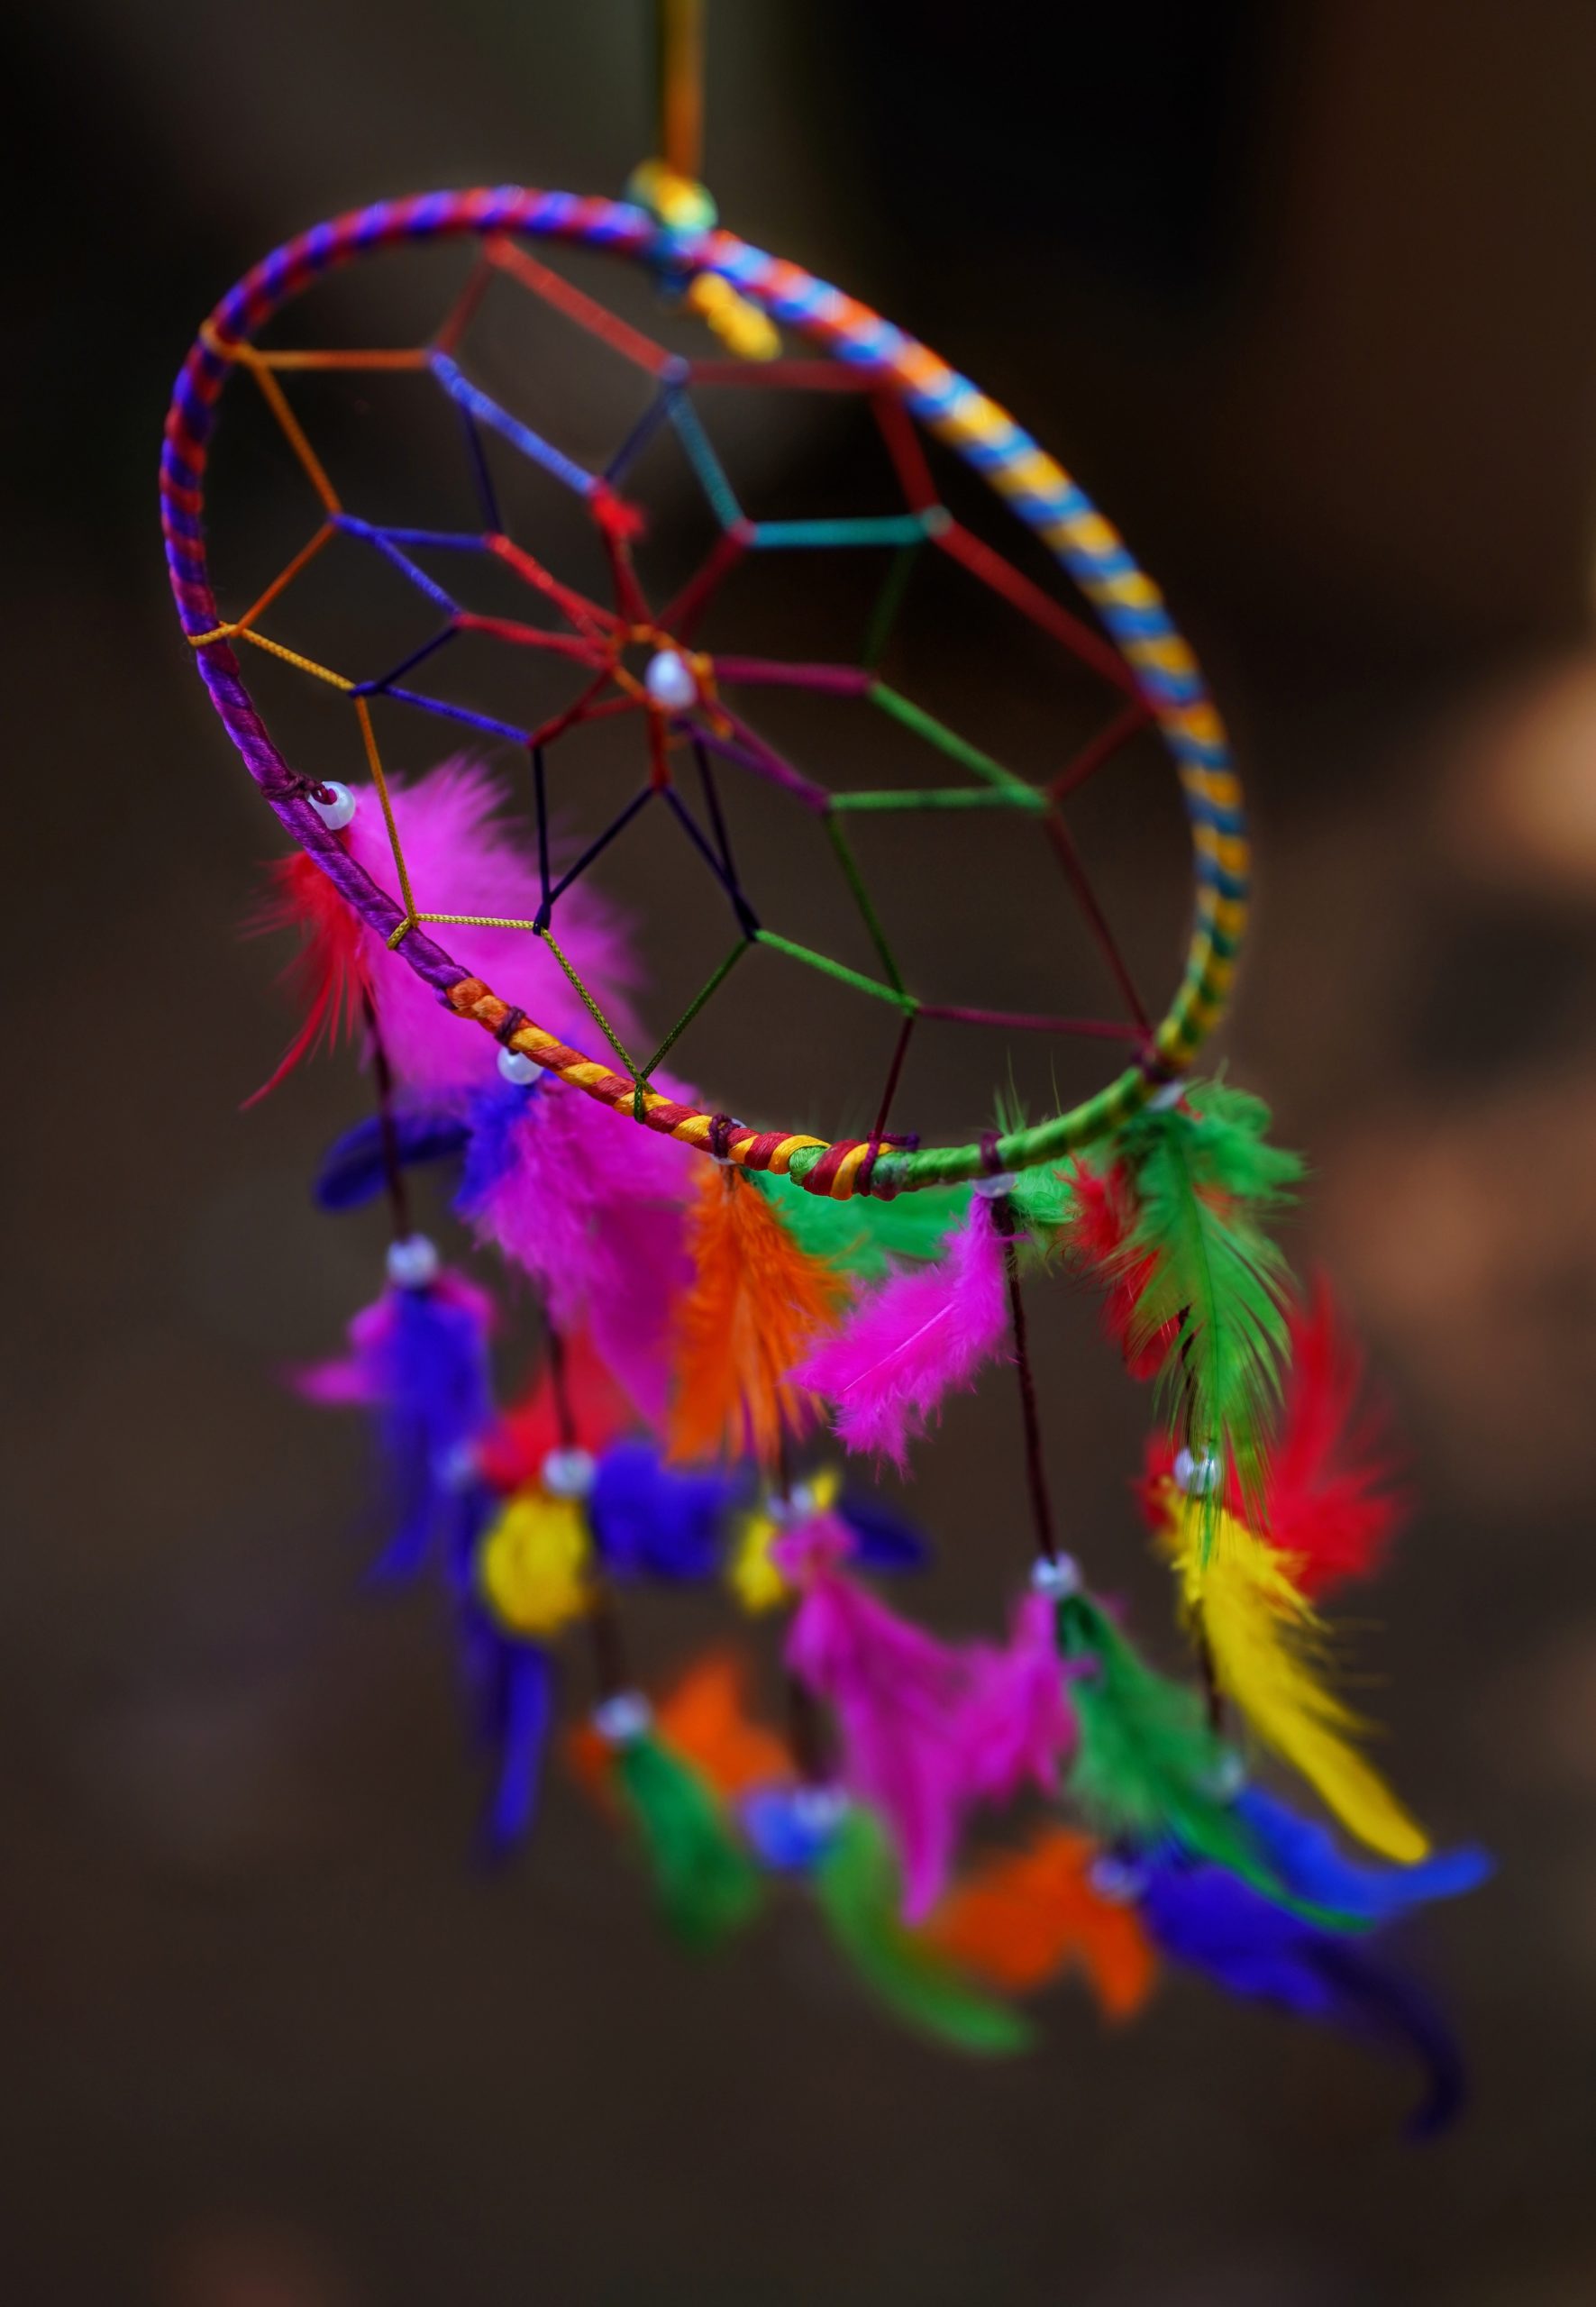 Dream Catcher: An Aesthetic Merchandise or a Cultural Totem? - A Nation of  Moms